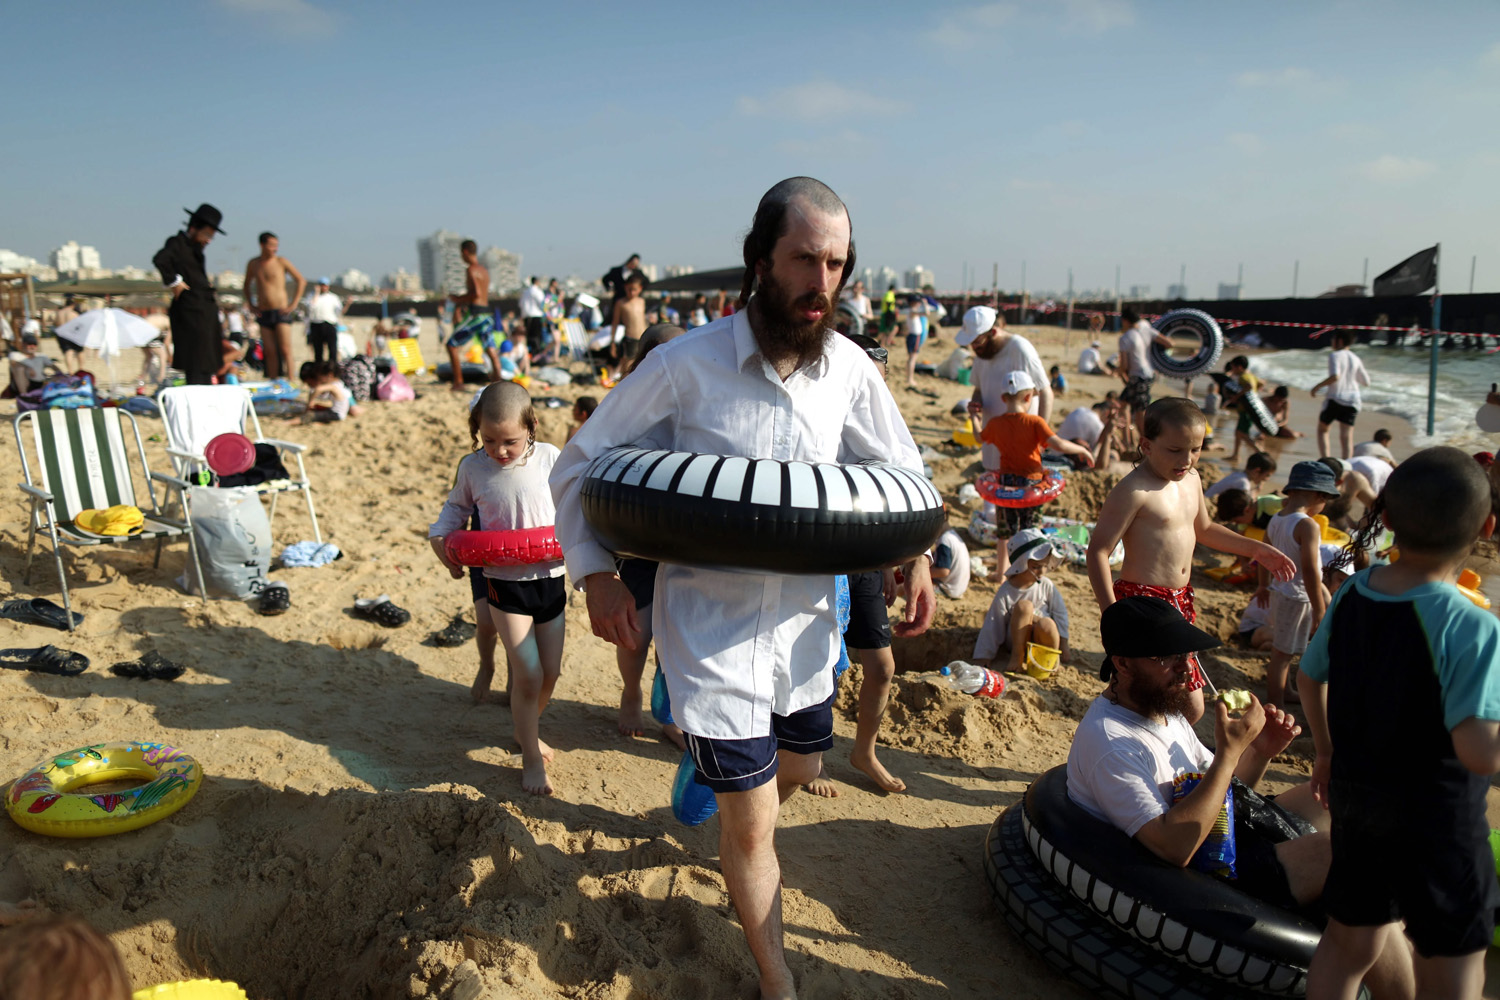 Ultra Orthodox Jews enjoying summer time at the beach with their families in the southern city of Ashdod , Israel on August 13, 2014.